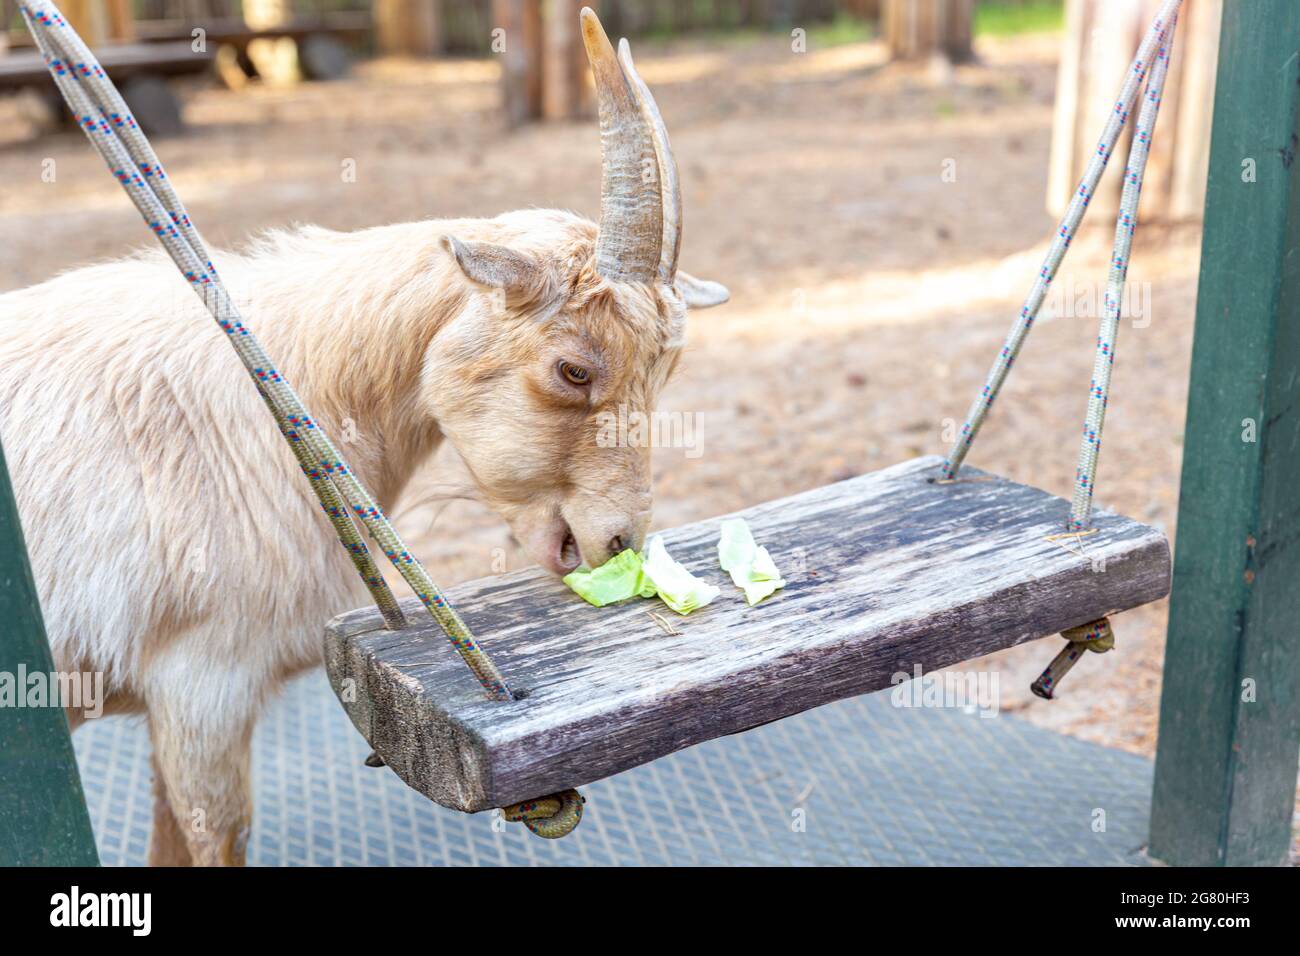 A beige goat with horns standing, eating cabbage. African pygmy miniature Cameroon goat. Taking care of pets on the farm. Feeding animals at the Stock Photo